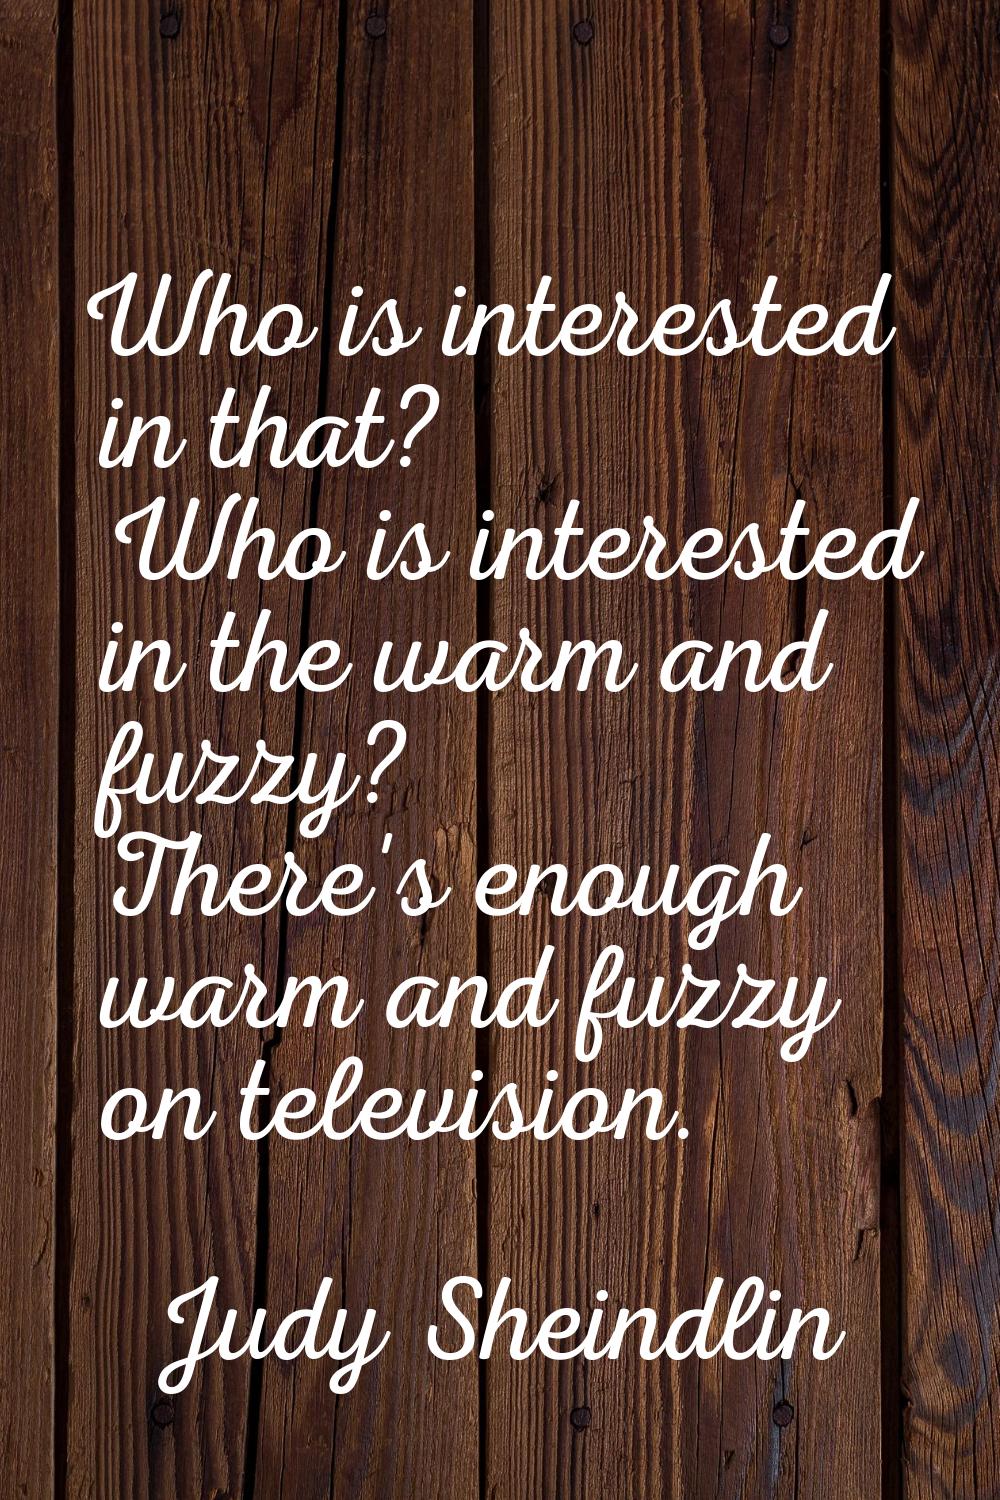 Who is interested in that? Who is interested in the warm and fuzzy? There's enough warm and fuzzy o